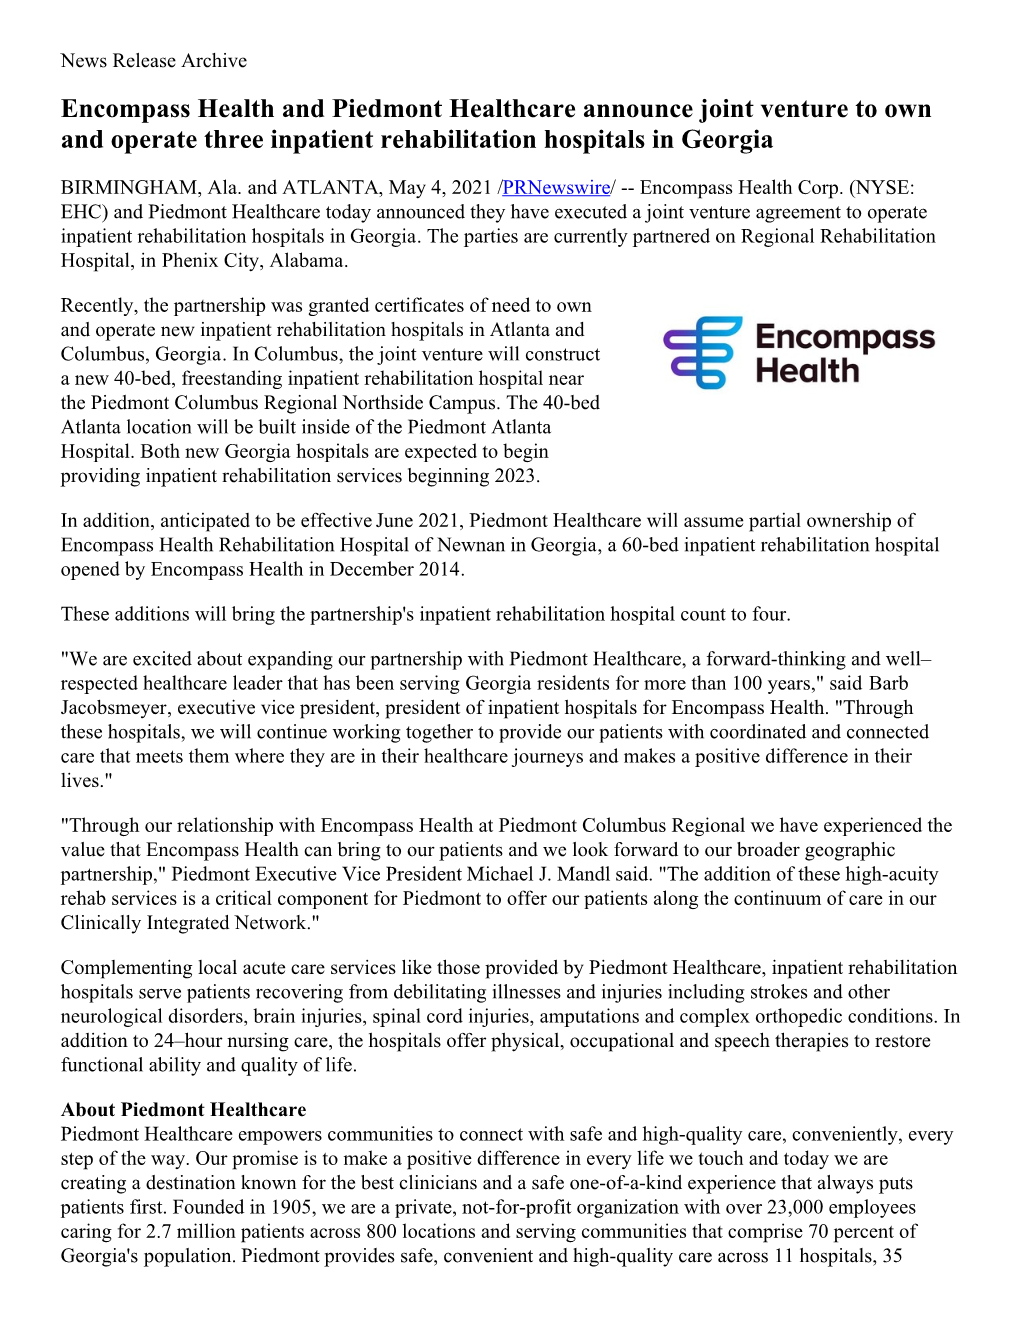 Encompass Health and Piedmont Healthcare Announce Joint Venture to Own and Operate Three Inpatient Rehabilitation Hospitals in Georgia